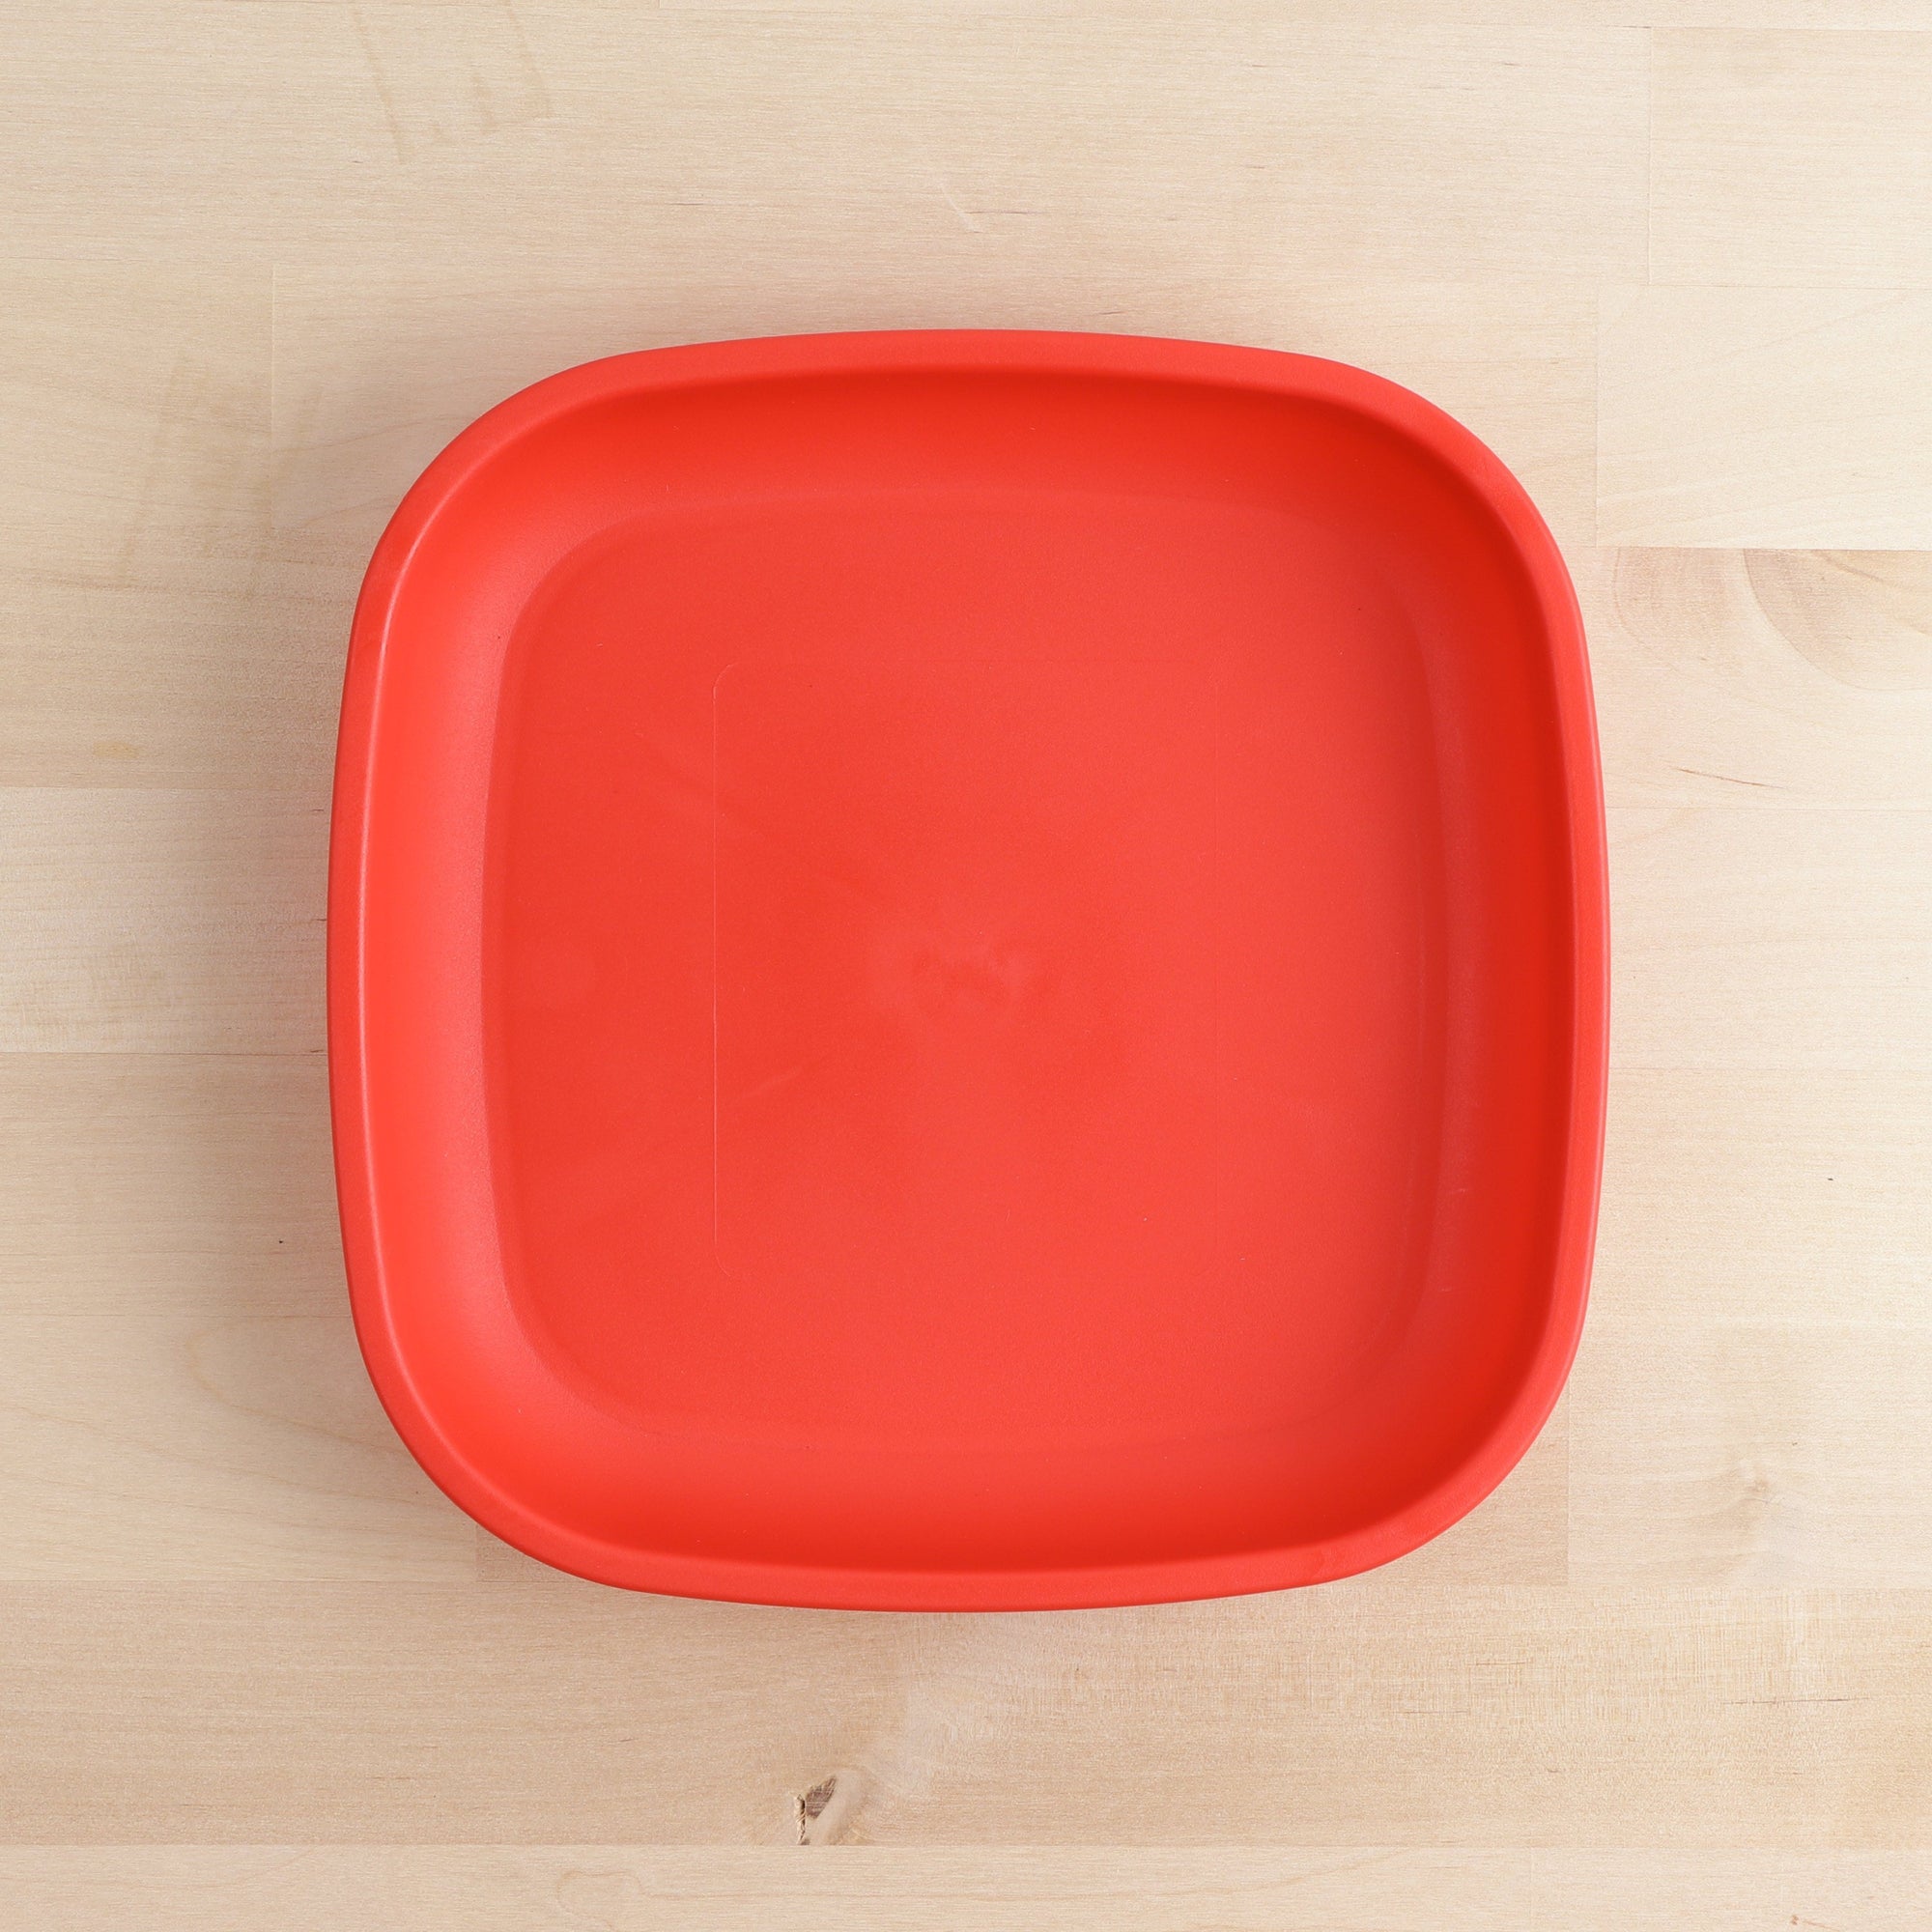 Large Flat Plate (Red)